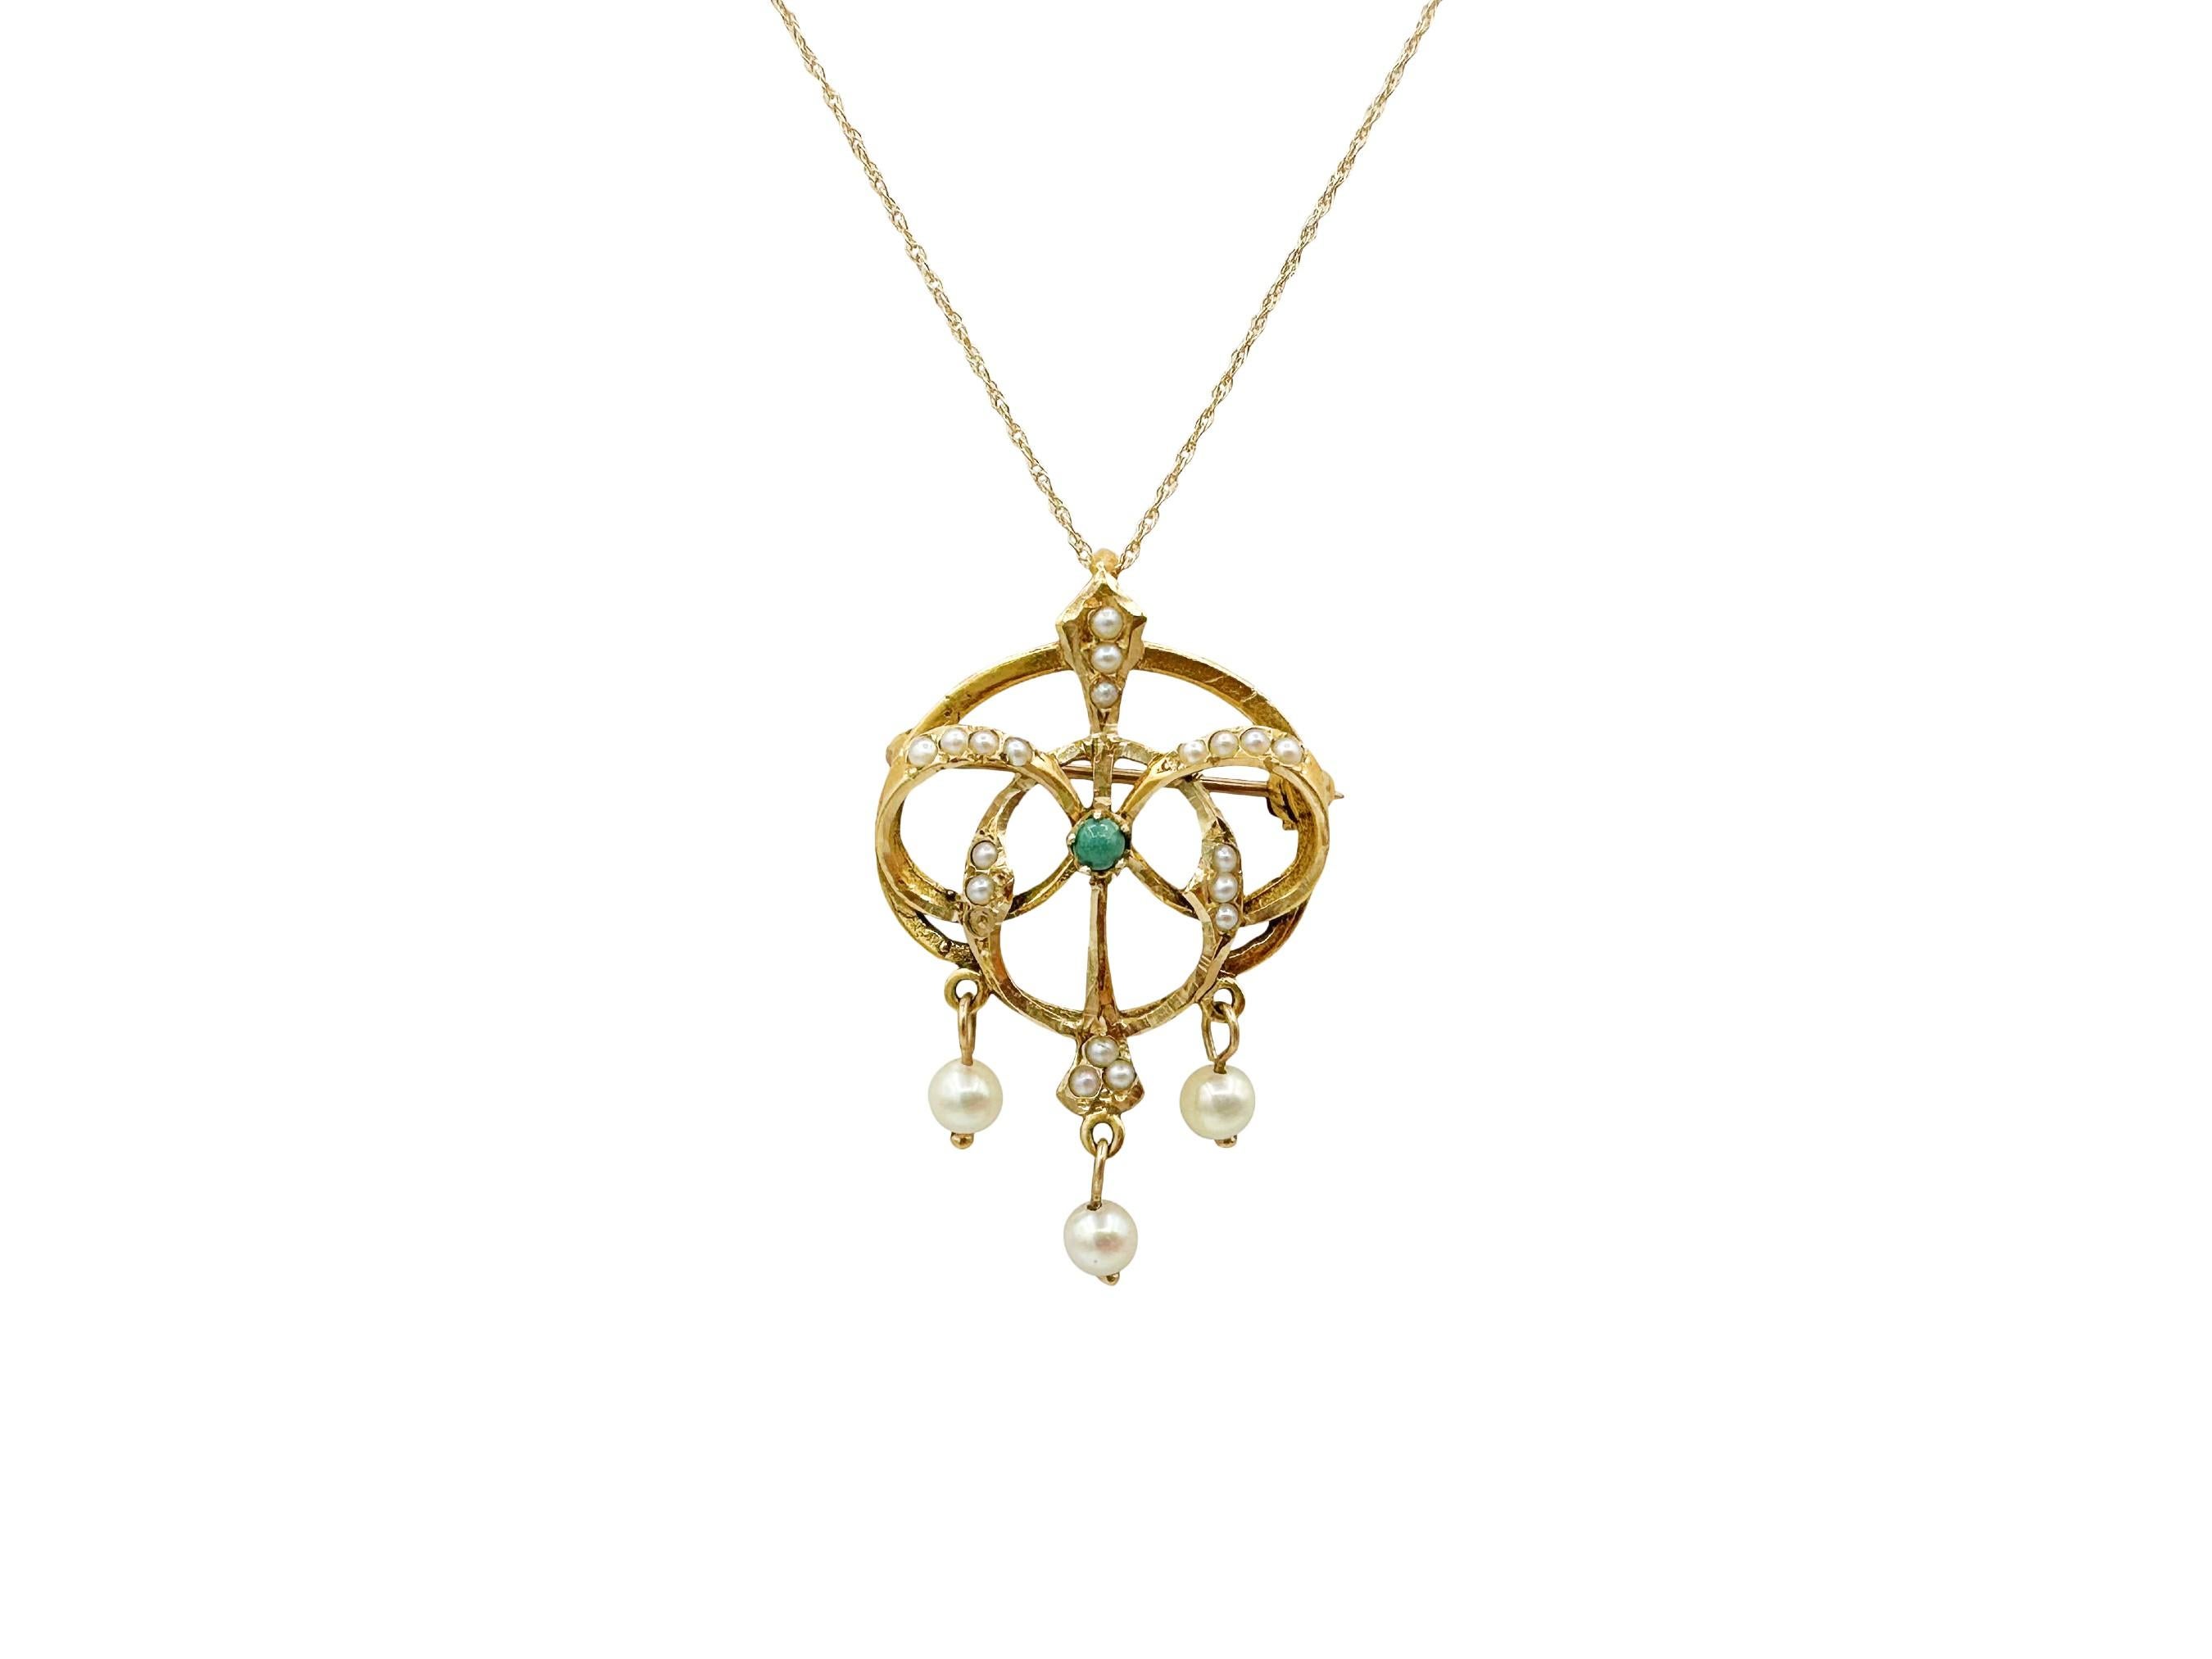 This one-of-a-kind vintage necklace is a stunning combination of turquoise and pearls. The pendant is crafted from 14k yellow gold shaped in a stylized bow made from interlocking ovals, symbolizing love, connection and fidelity. Seed pearls dot the